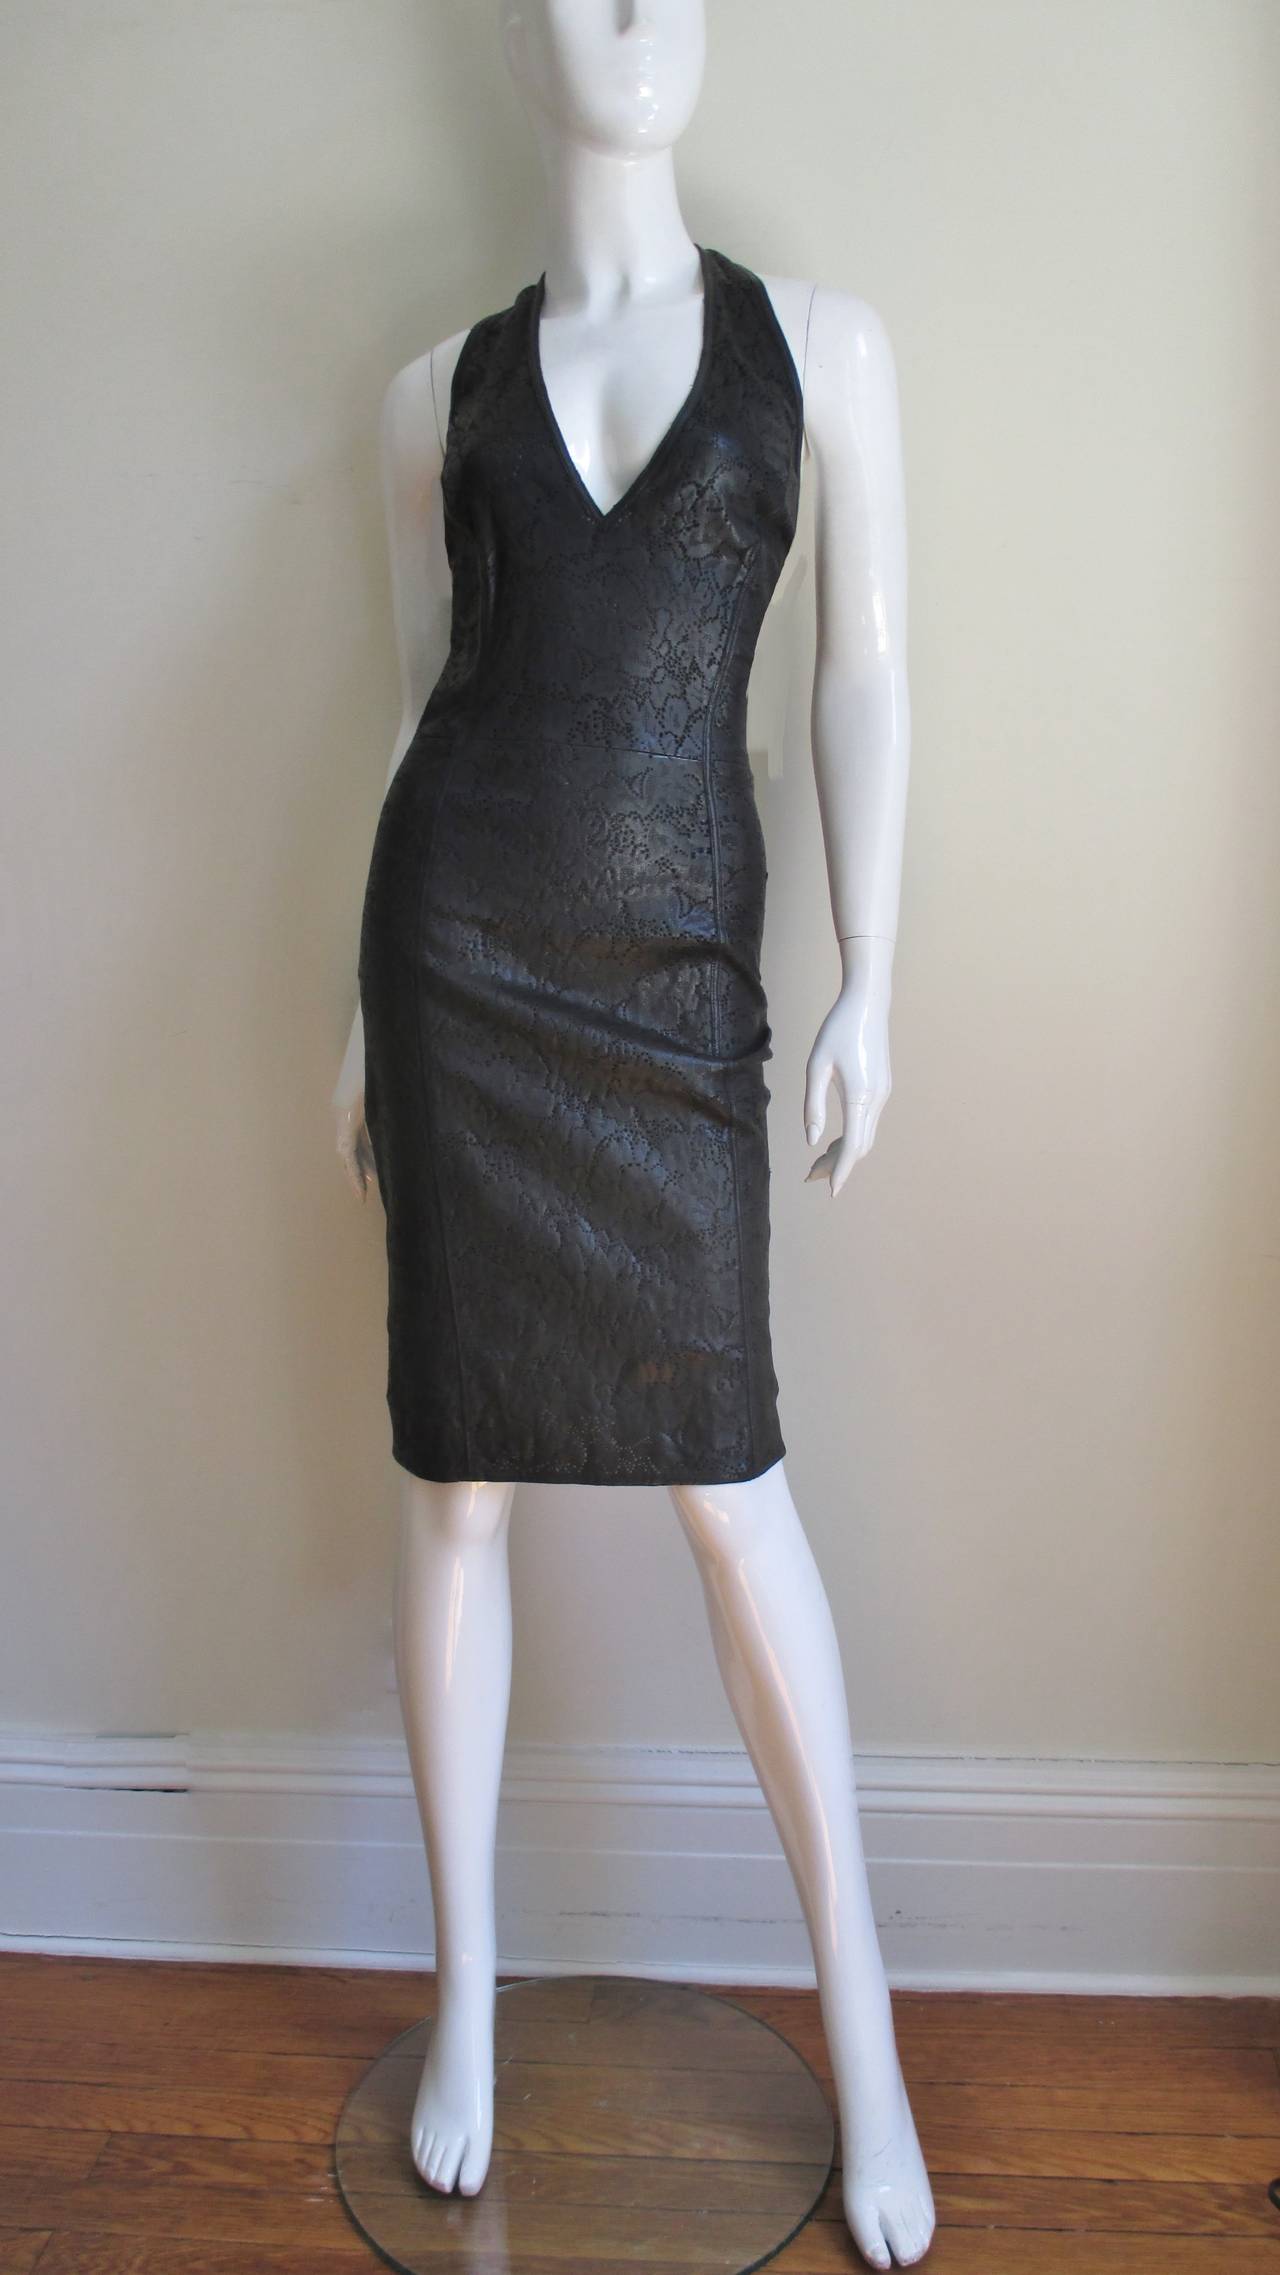 Gianni Versace Laser Perforated Leather Halter Dress 1990s In Good Condition For Sale In Water Mill, NY